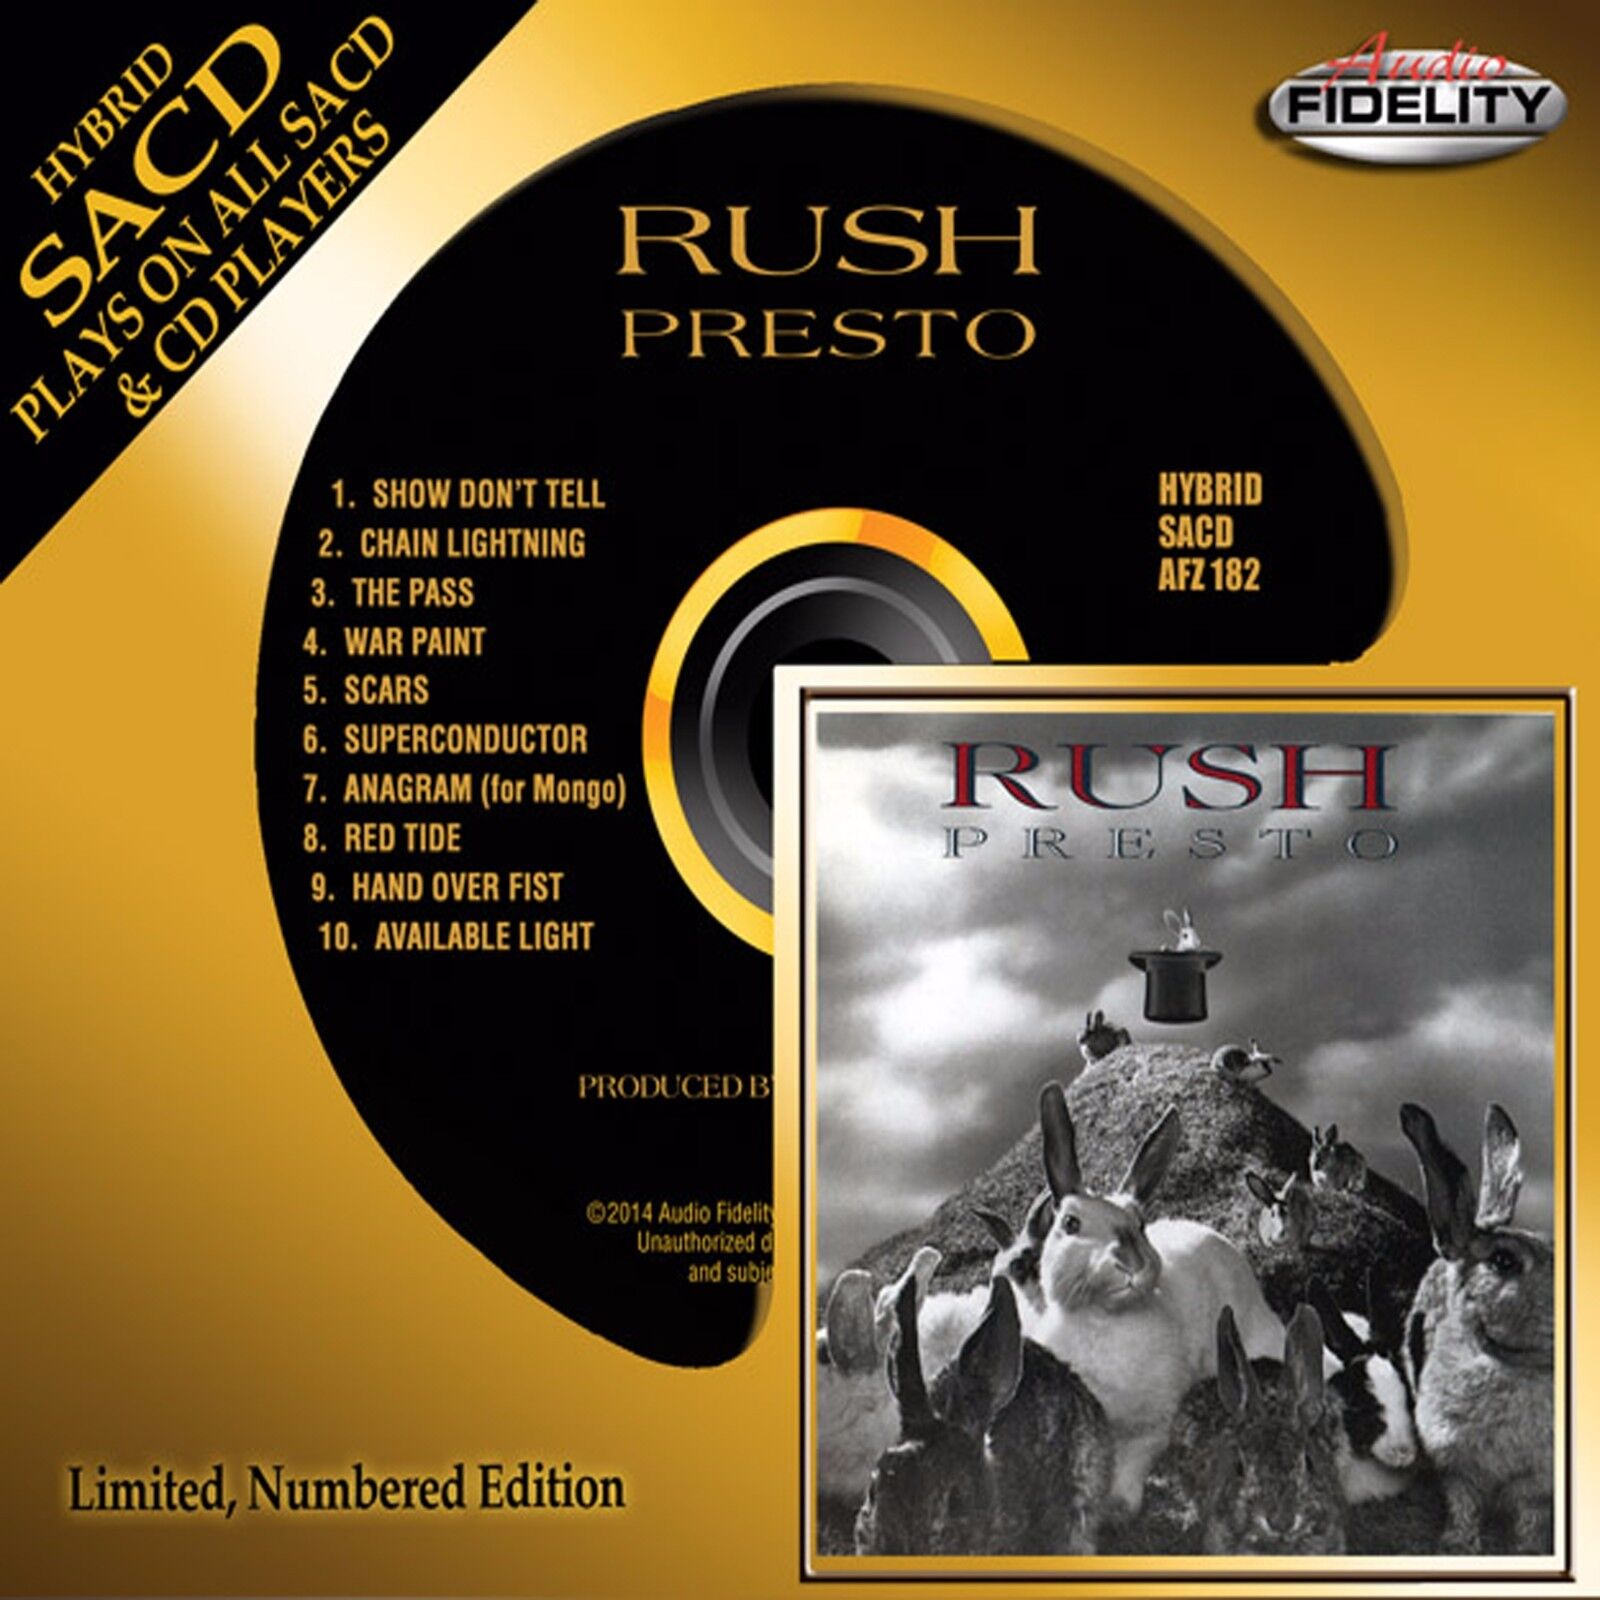 RUSH - Presto - Hybrid SACD - Limited Numbered Edition - AFZ182